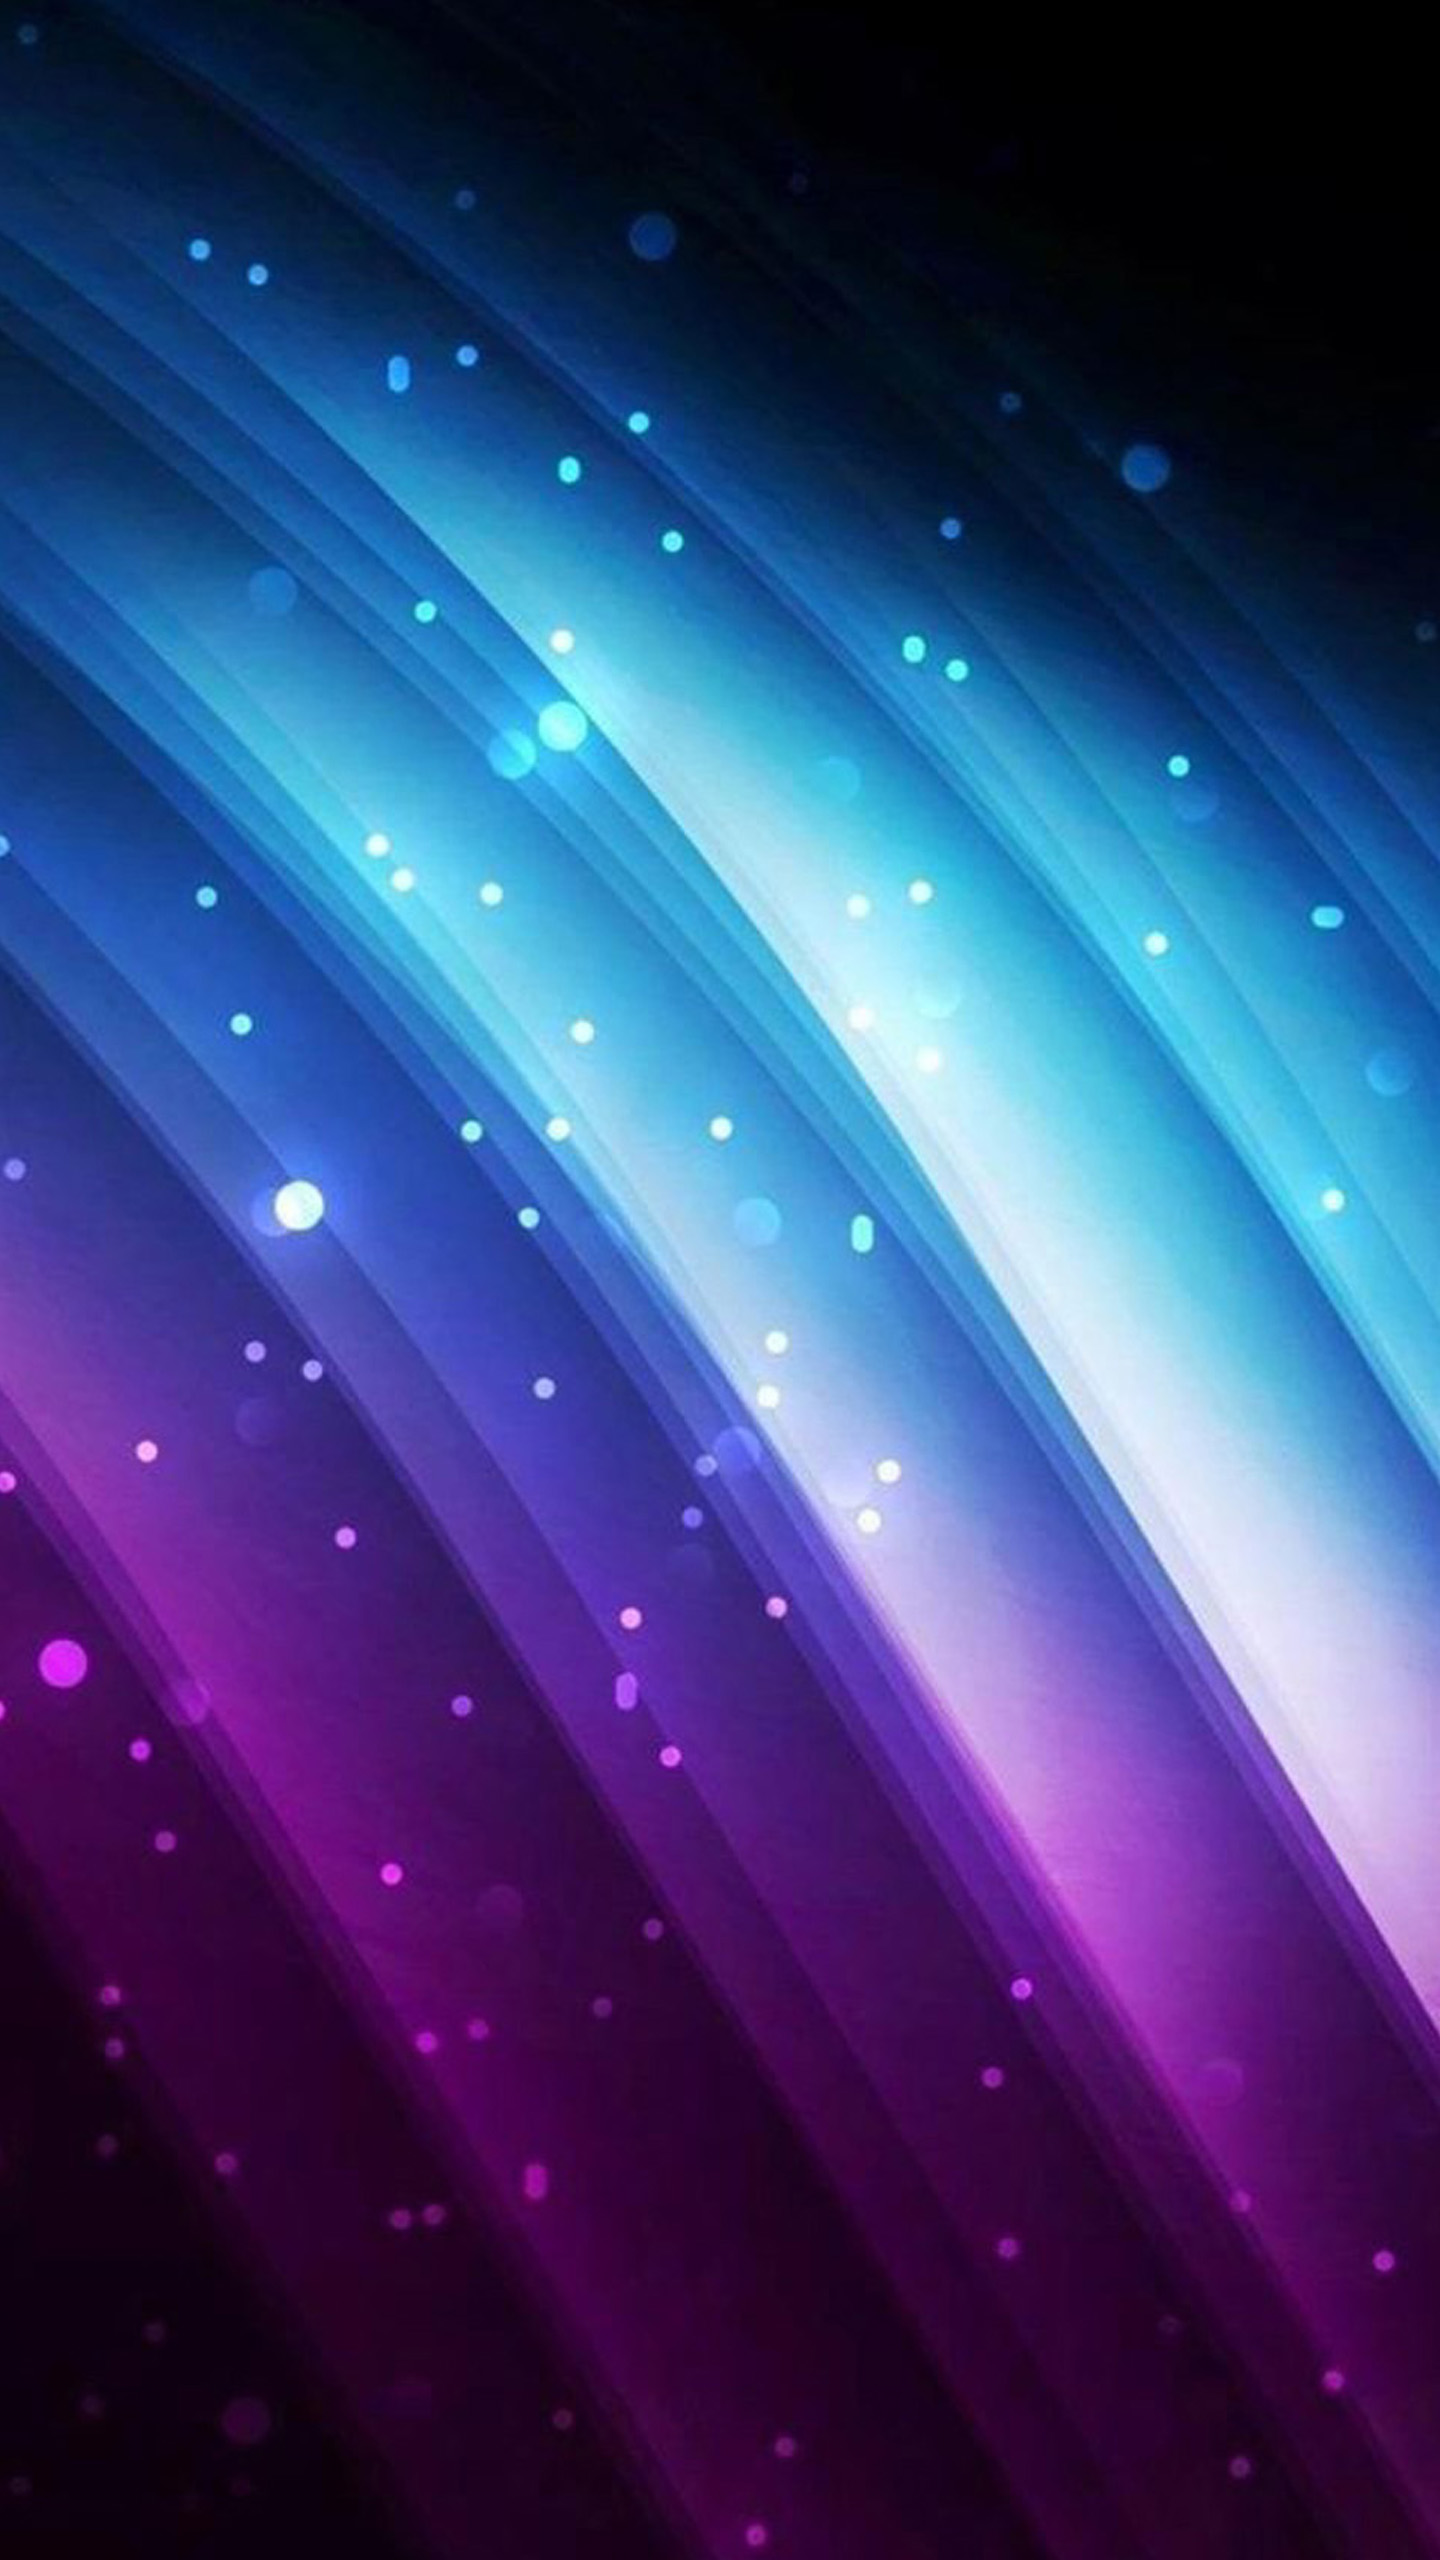 Free download Colorful Samsung Galaxy S6 Wallpaper 88 Galaxy S6